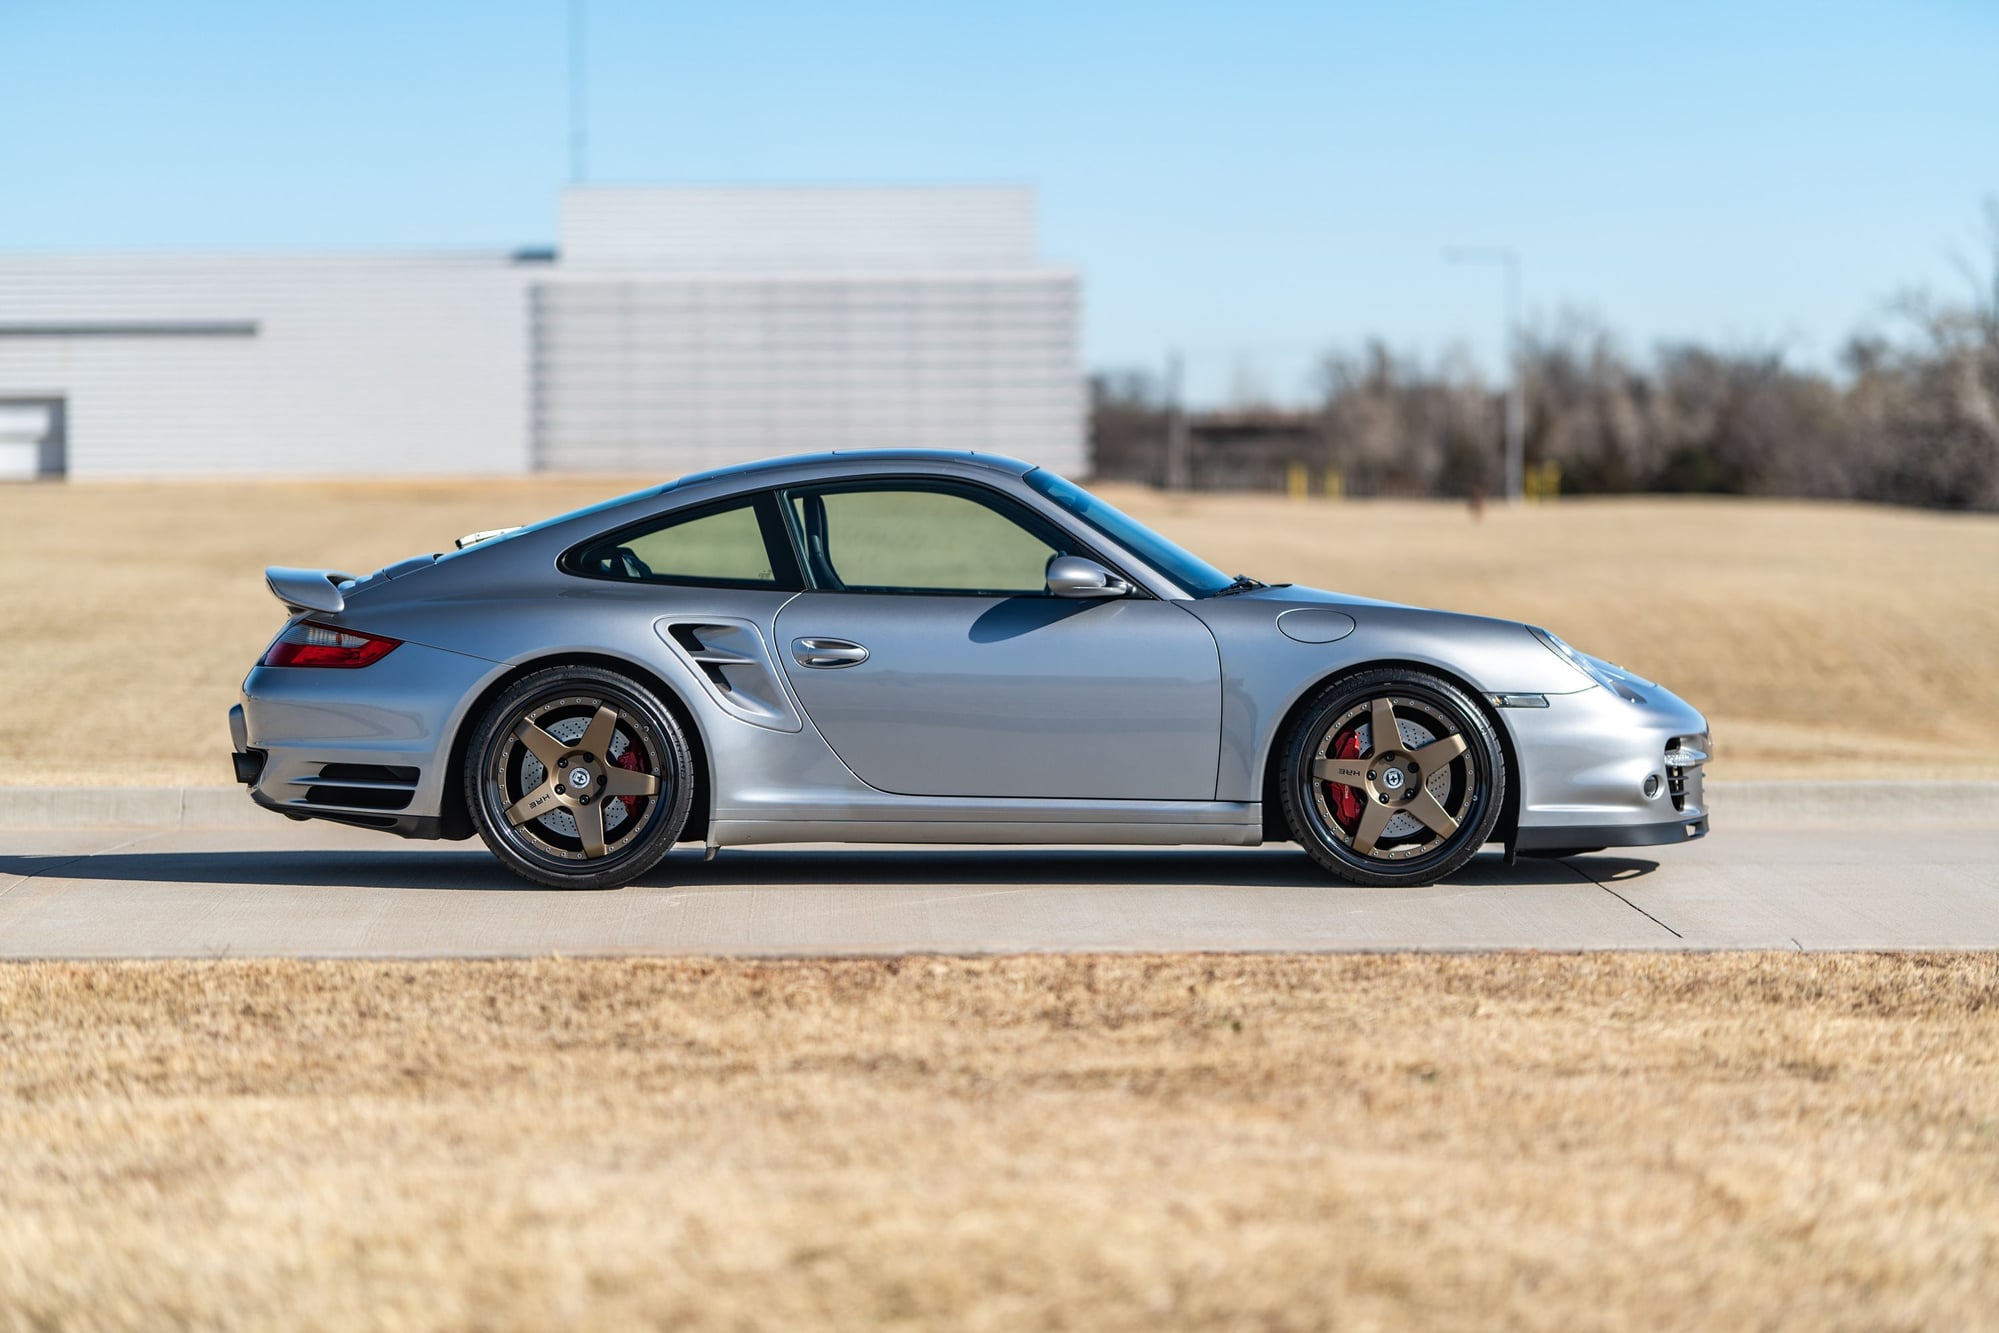 2008 Porsche 911 - 2008 911 Turbo 6 speed tastefully modified - Used - VIN WP0AD299X8S783477 - 48,500 Miles - 6 cyl - AWD - Manual - Coupe - Silver - Oklahoma City, OK 73118, United States